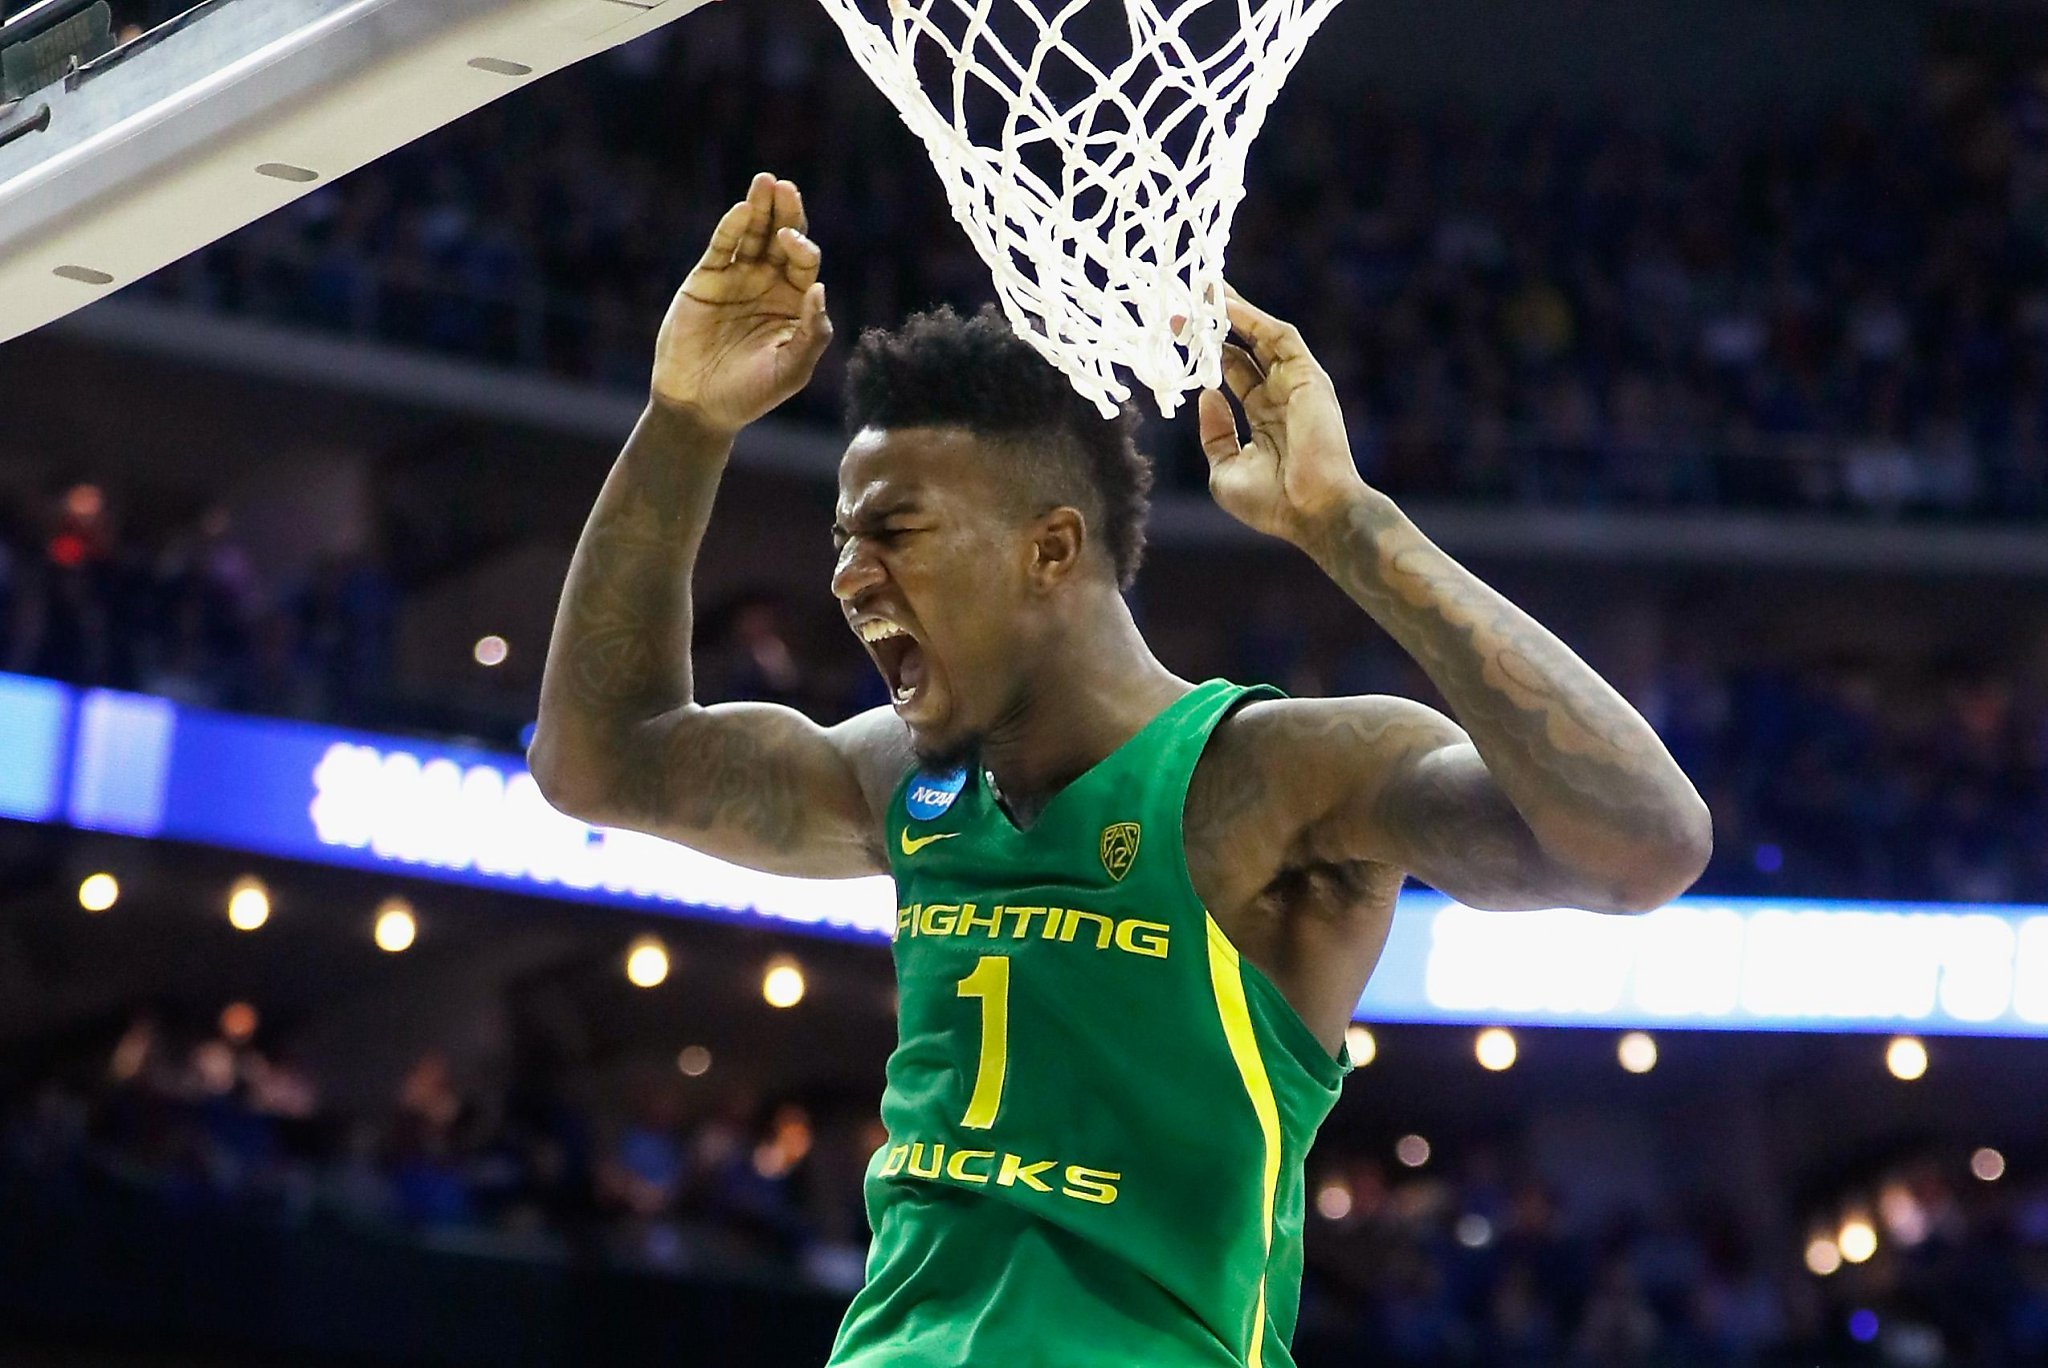 Warriors buy into 2nd round to select Oregon’s Jordan Bell - SFGate